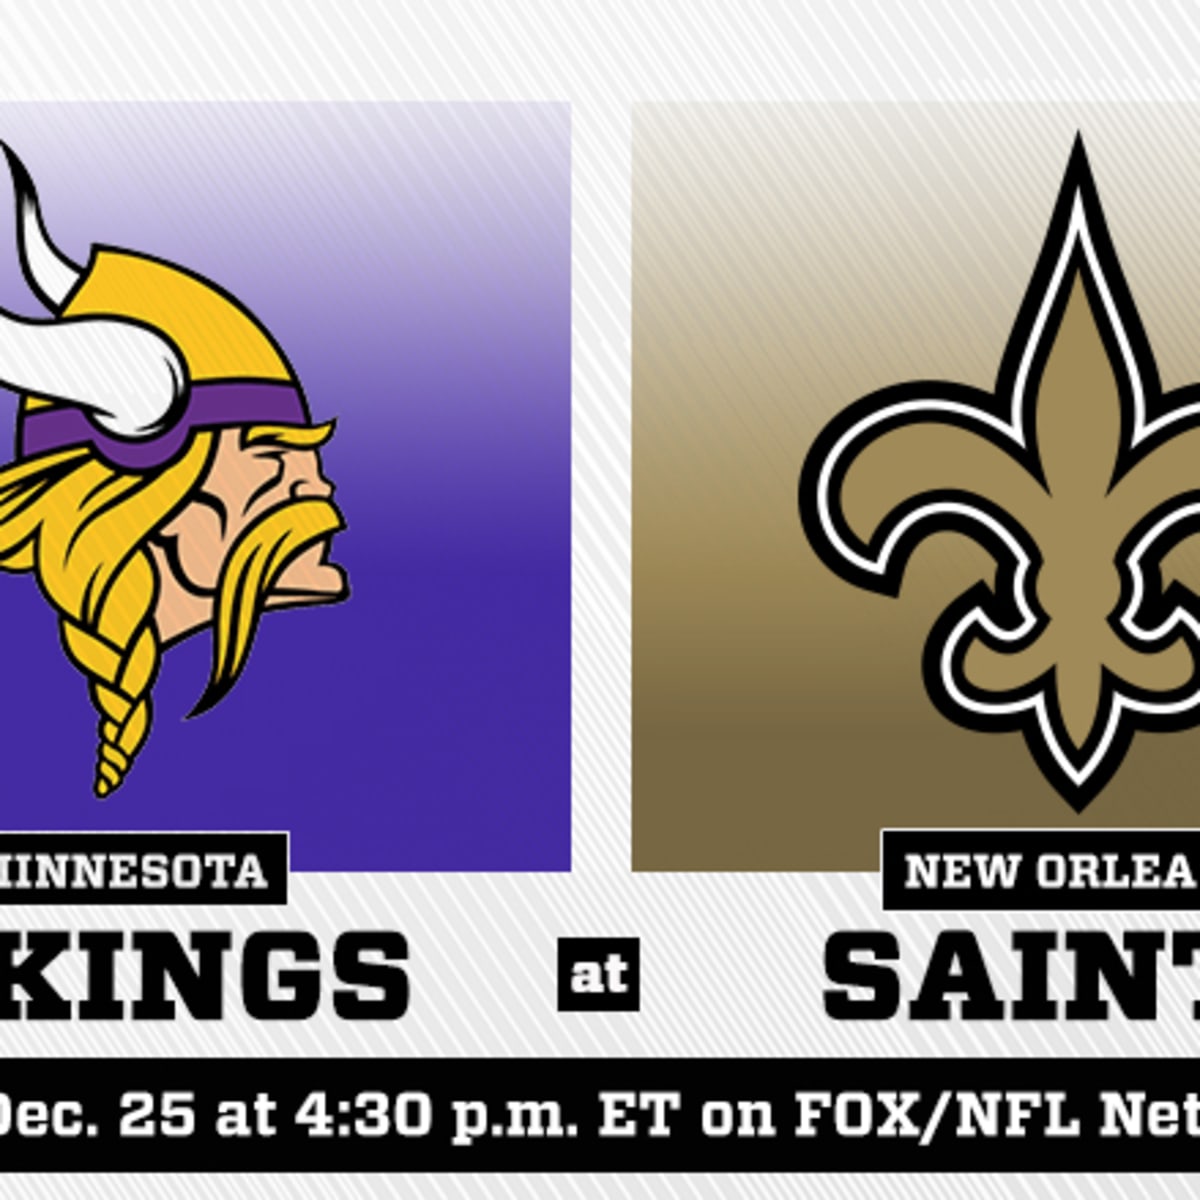 Minnesota Vikings vs. New Orleans Saints Prediction and Preview